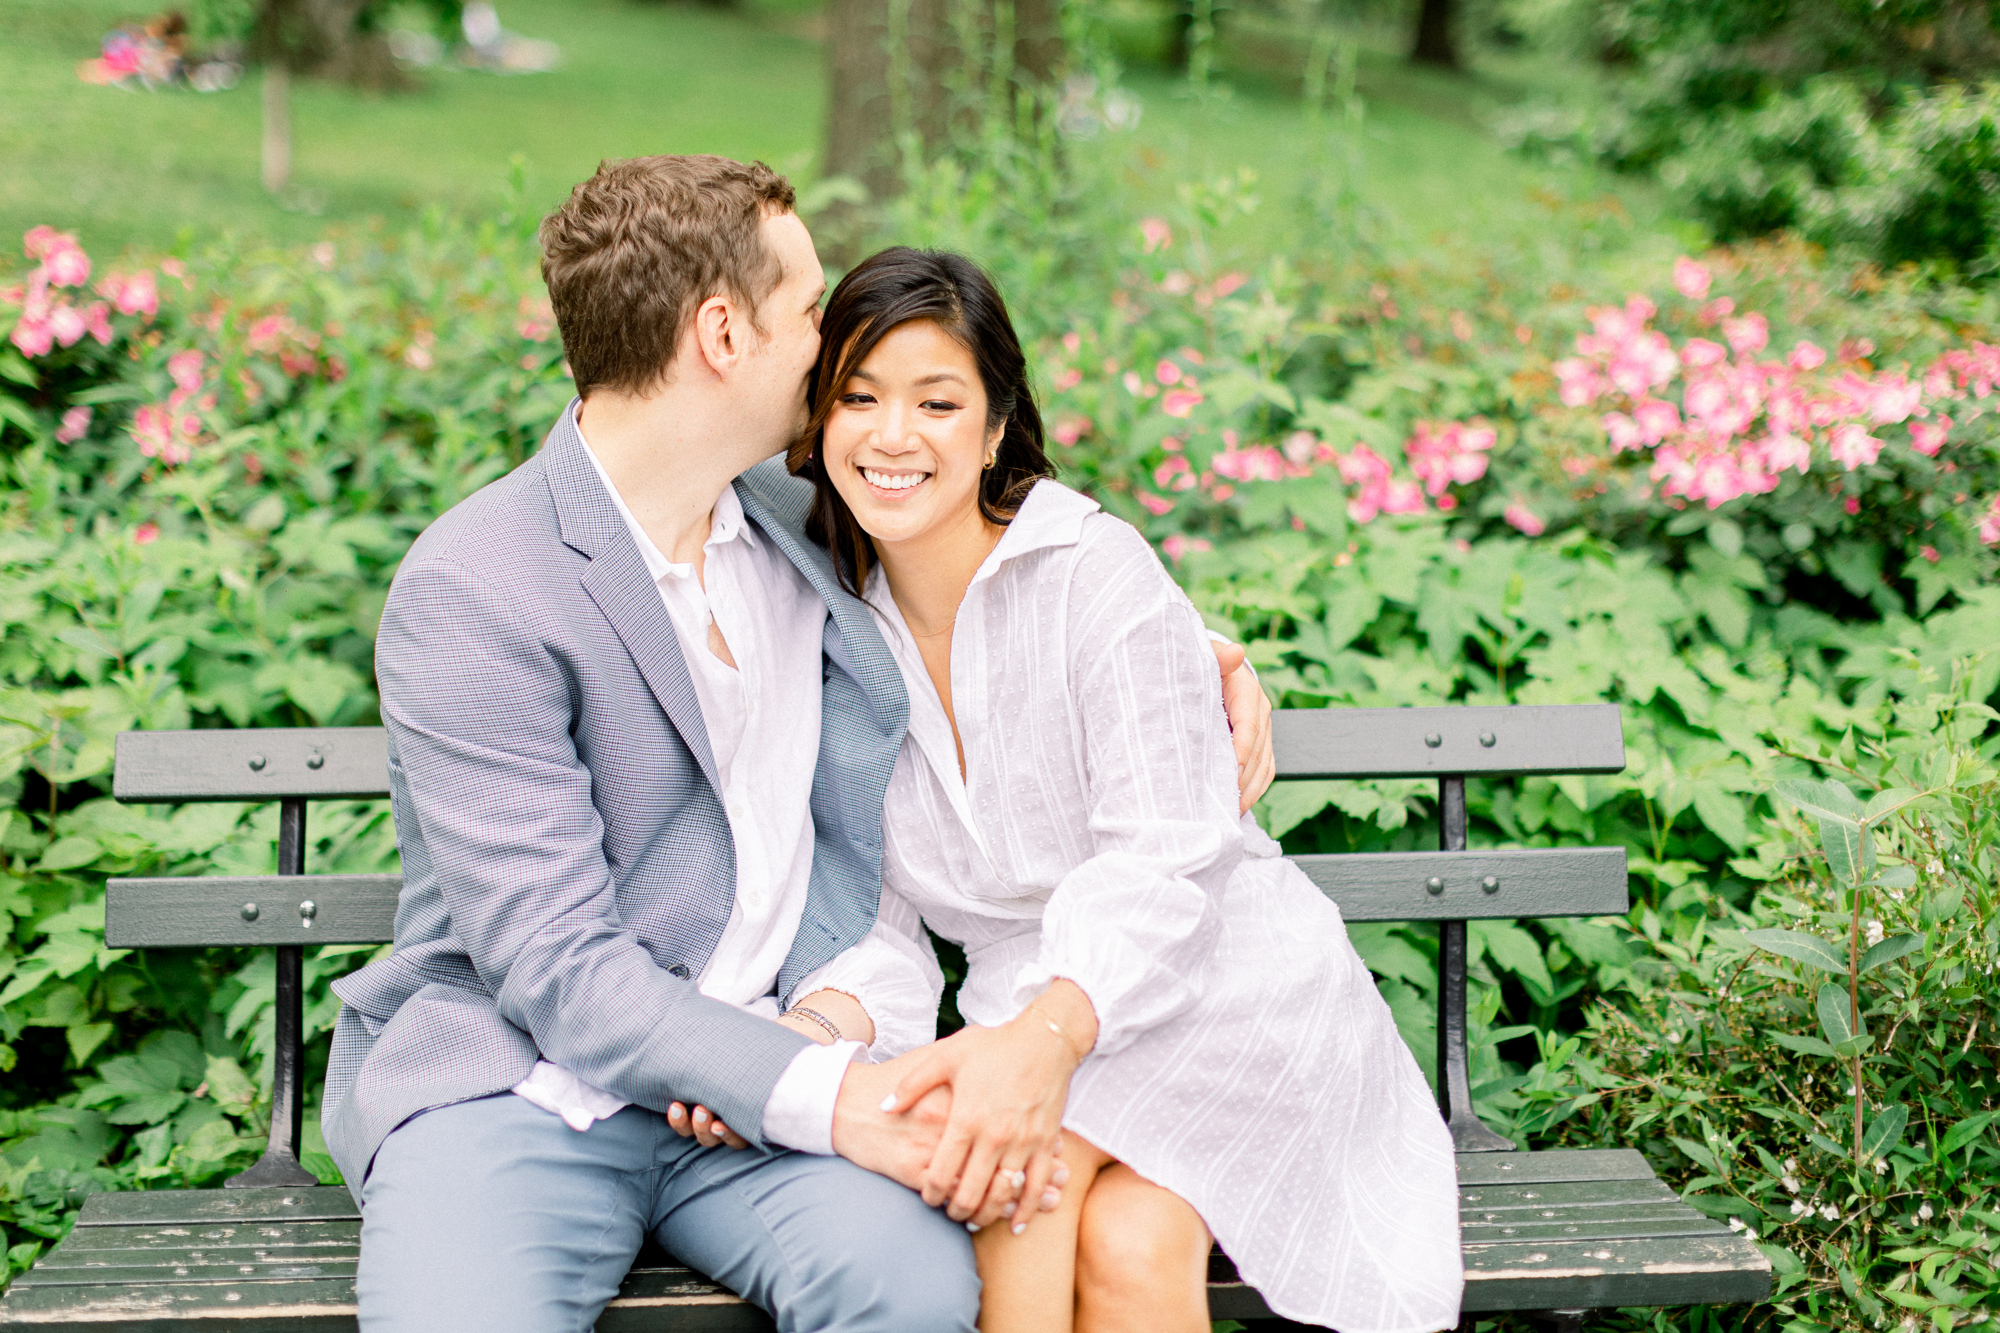 Spectacular Central Park Rowboat Engagement Photography in New York